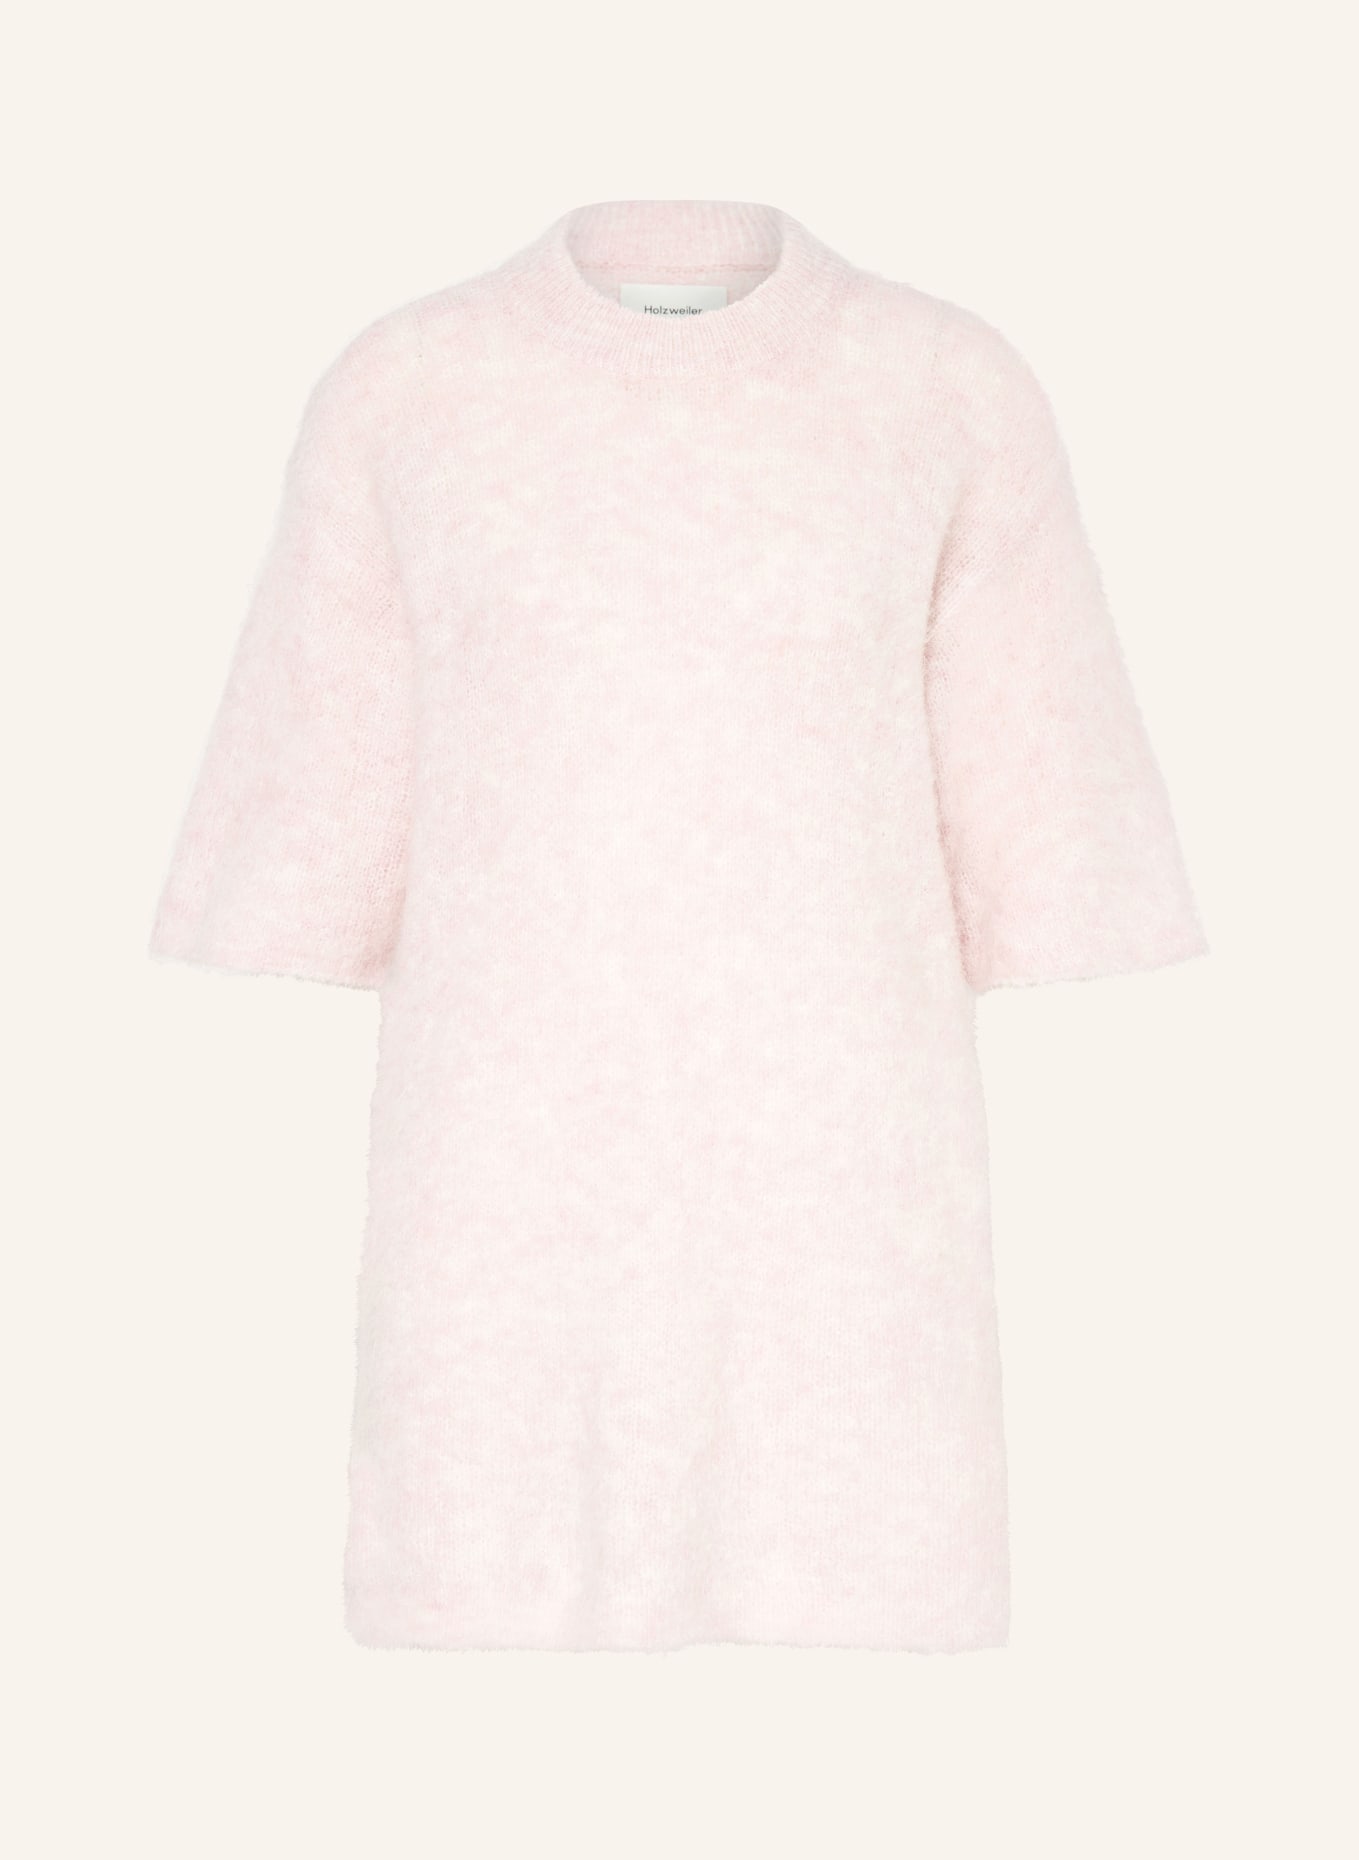 HOLZWEILER Knit shirt with alpaca, Color: PINK (Image 1)